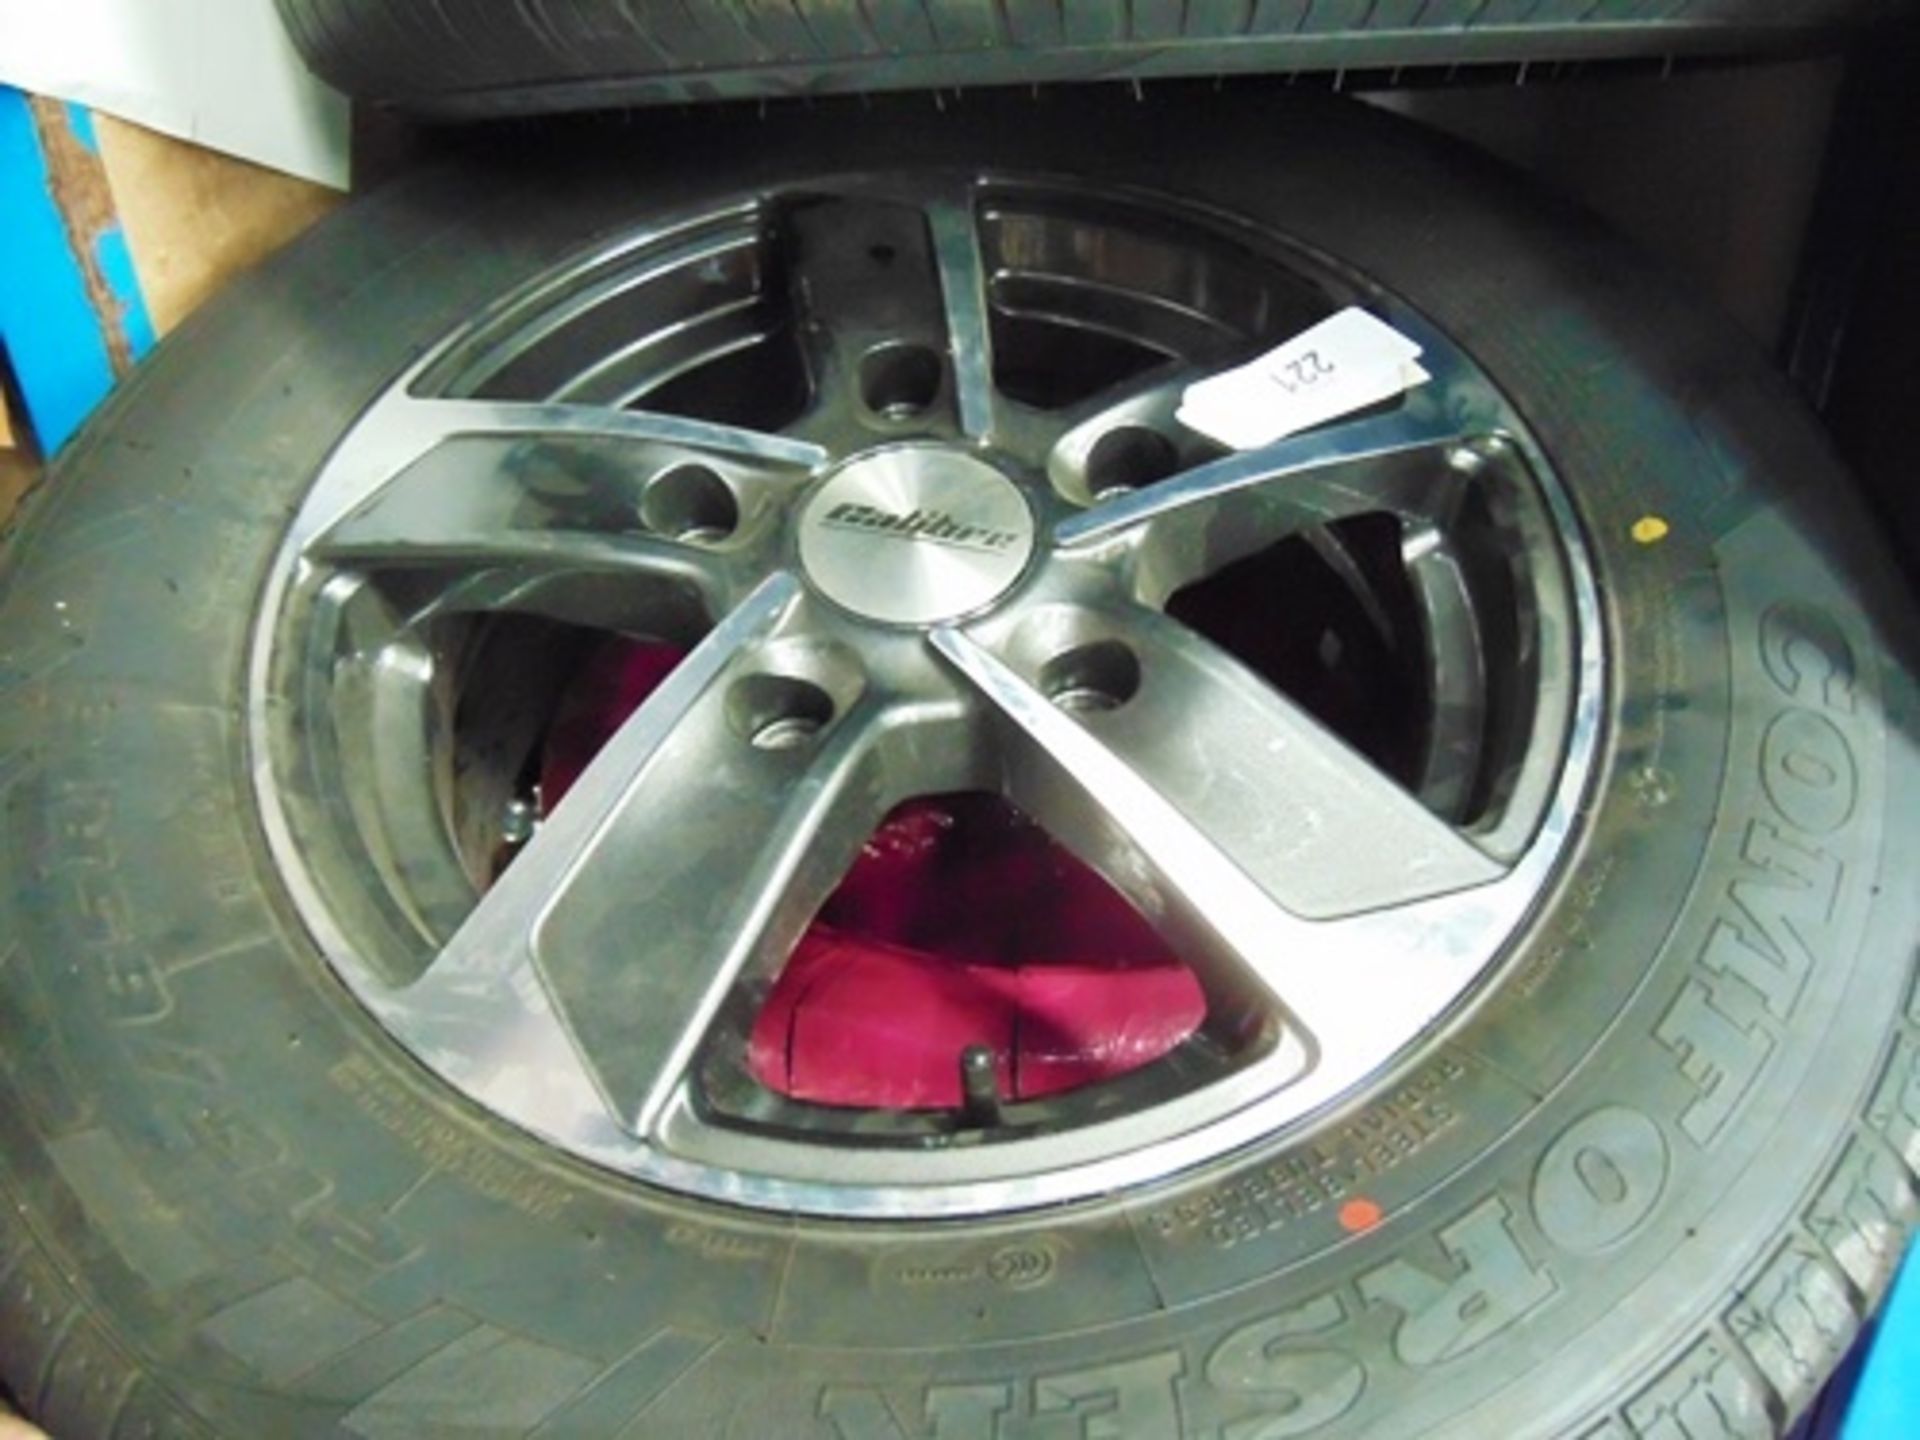 Calibre alloy wheel, 5 spoke, TR36 16" x 6.5" JJ, PCD 5 x 155 with Comforser CF2000 215/65/16 tyre - - Image 2 of 3